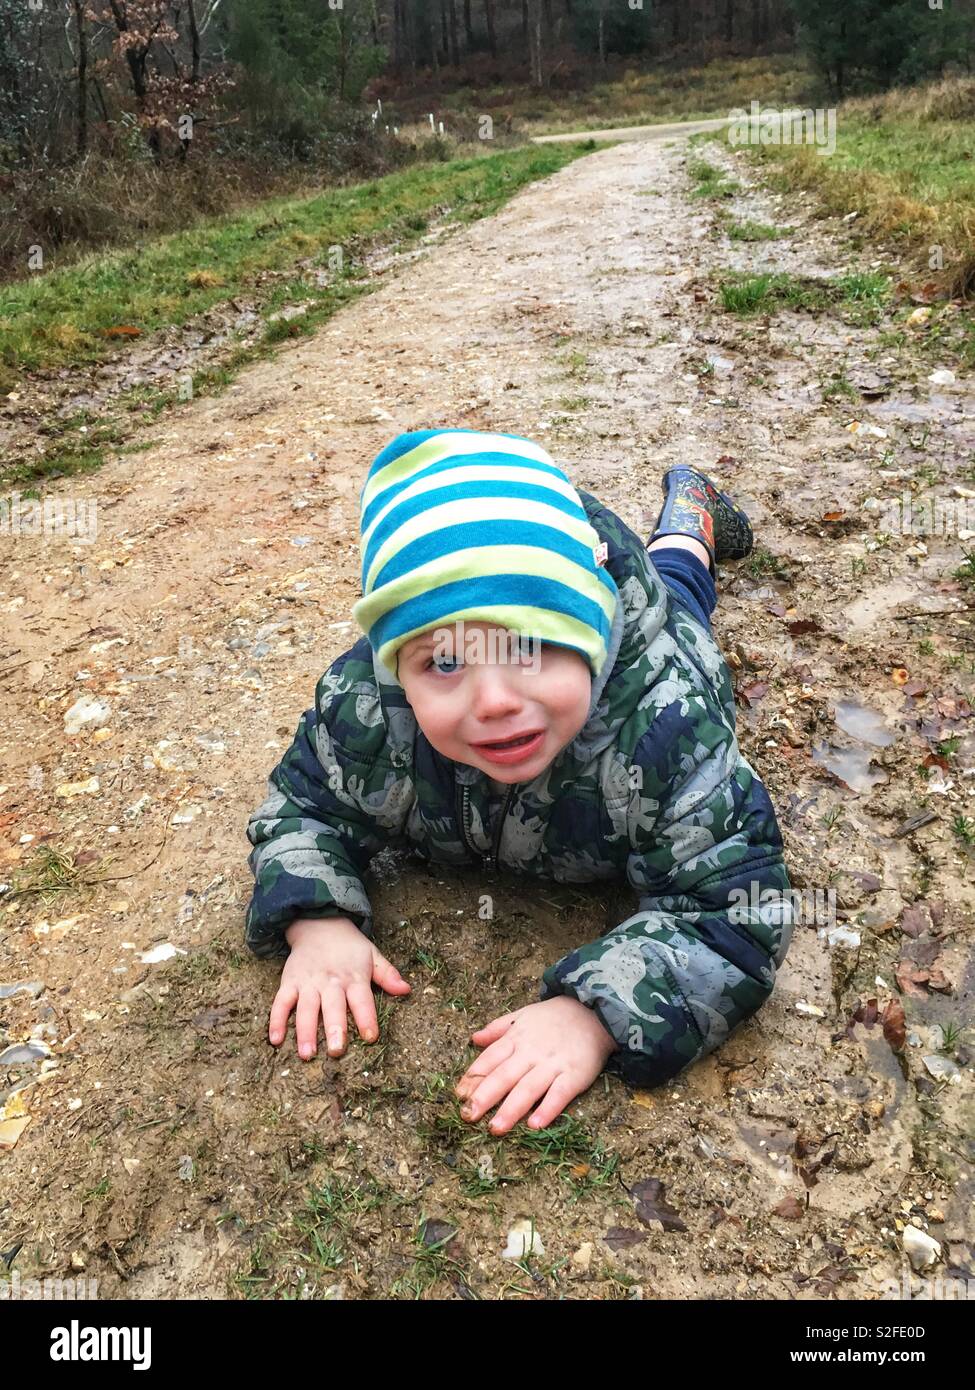 Two year old boy who has fallen over on a muddy footpath, Hampshire, England, United Kingdom. Stock Photo